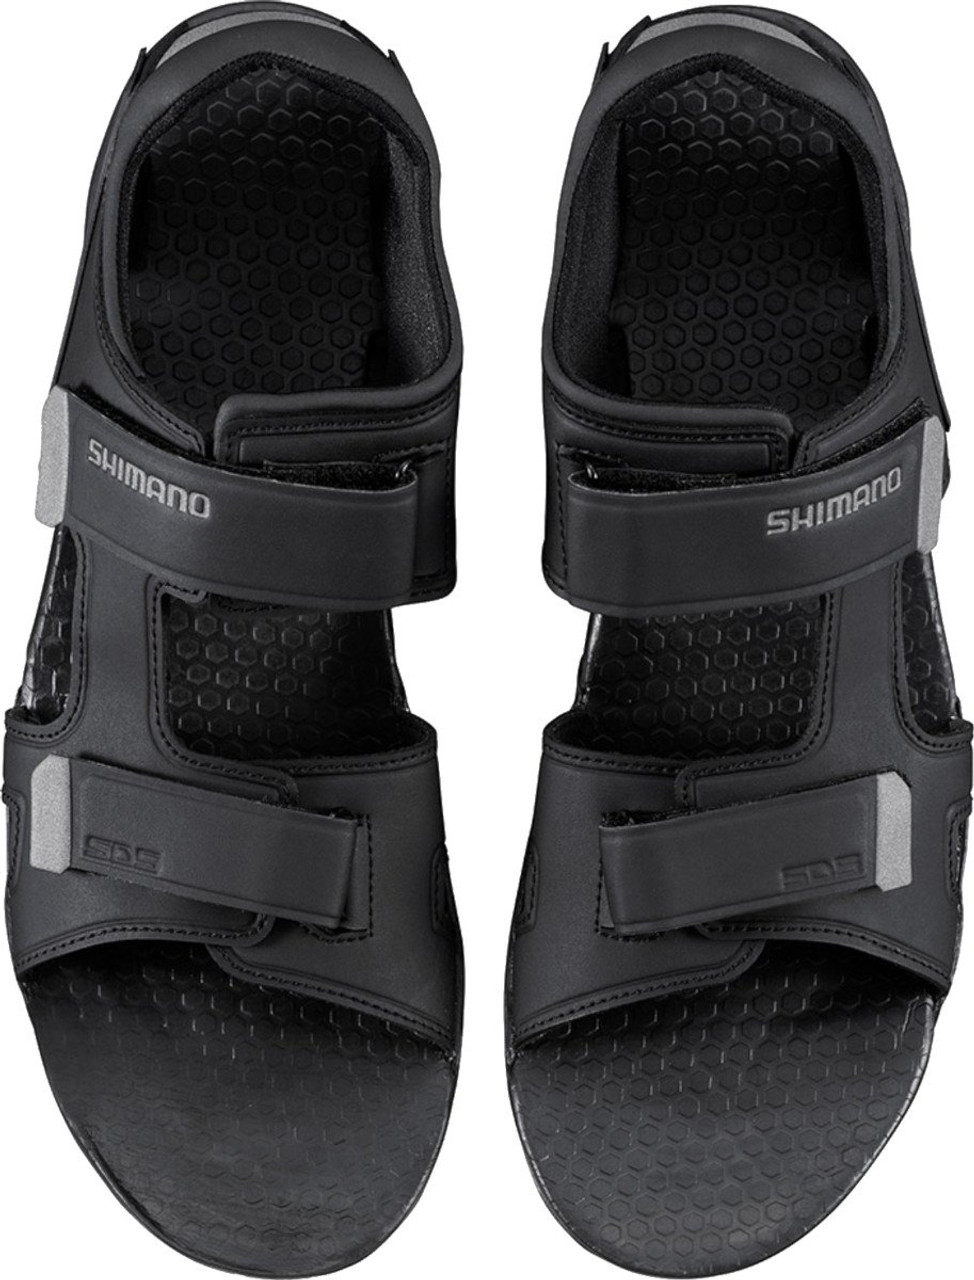 Details more than 233 cycling sandals mens latest